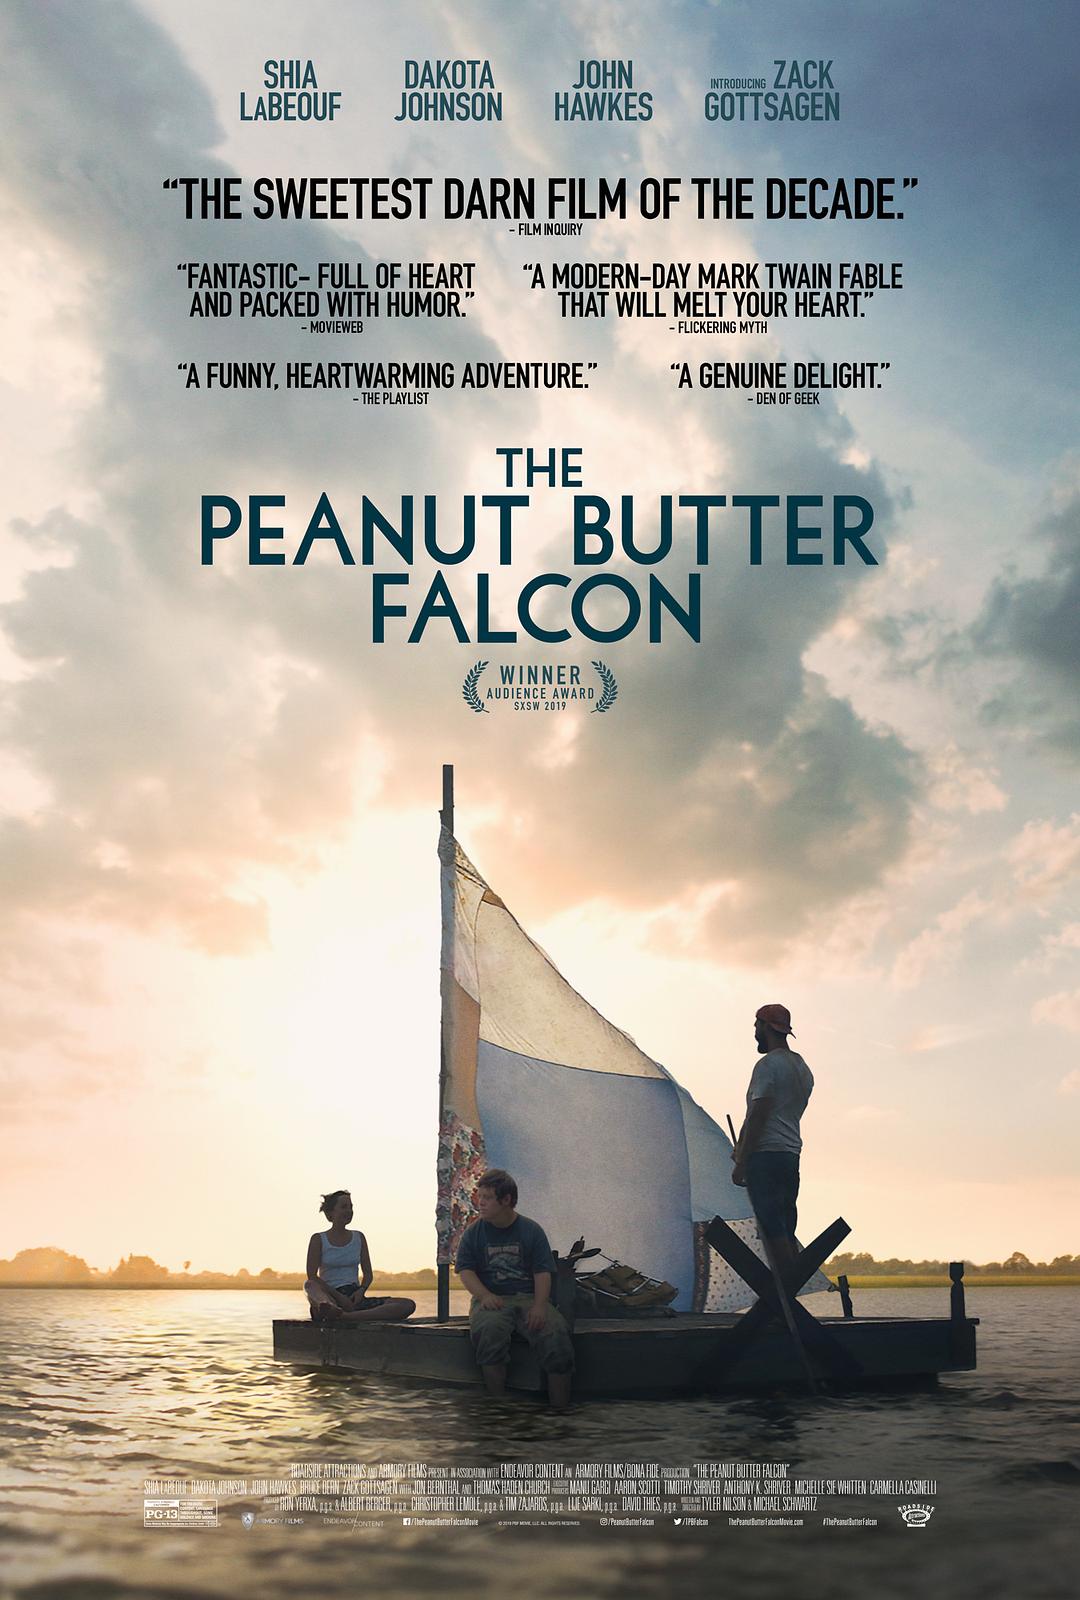 ӥ/ӥԸ The.Peanut.Butter.Falcon.2019.720p.BluRay.x264-DRONES 4.38GB-1.png